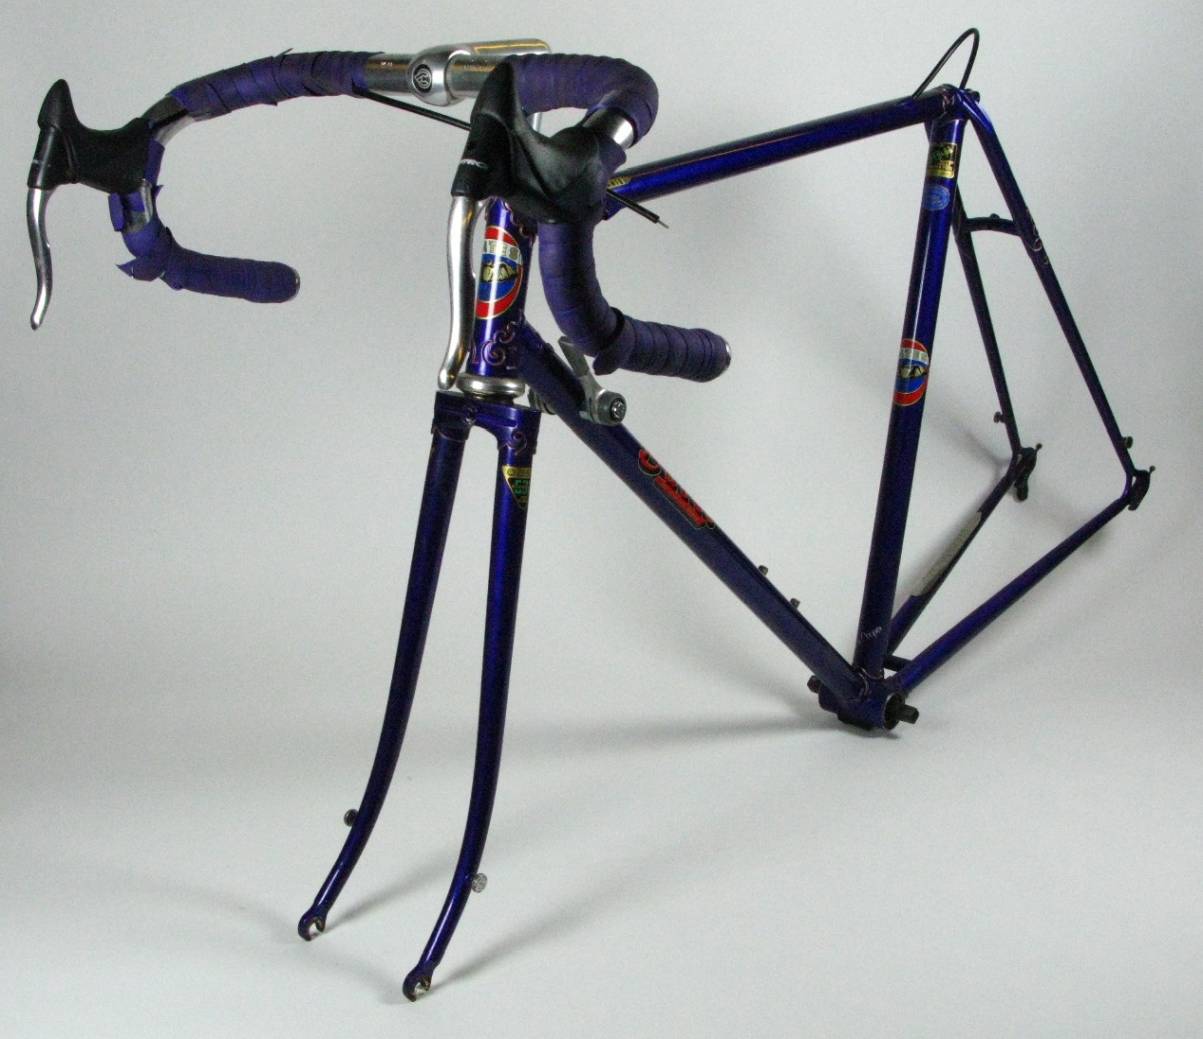 *Bates 'Volante' Bicycle Frame. Dating circa 1990, and finished in purple enamel, with a 22-inch